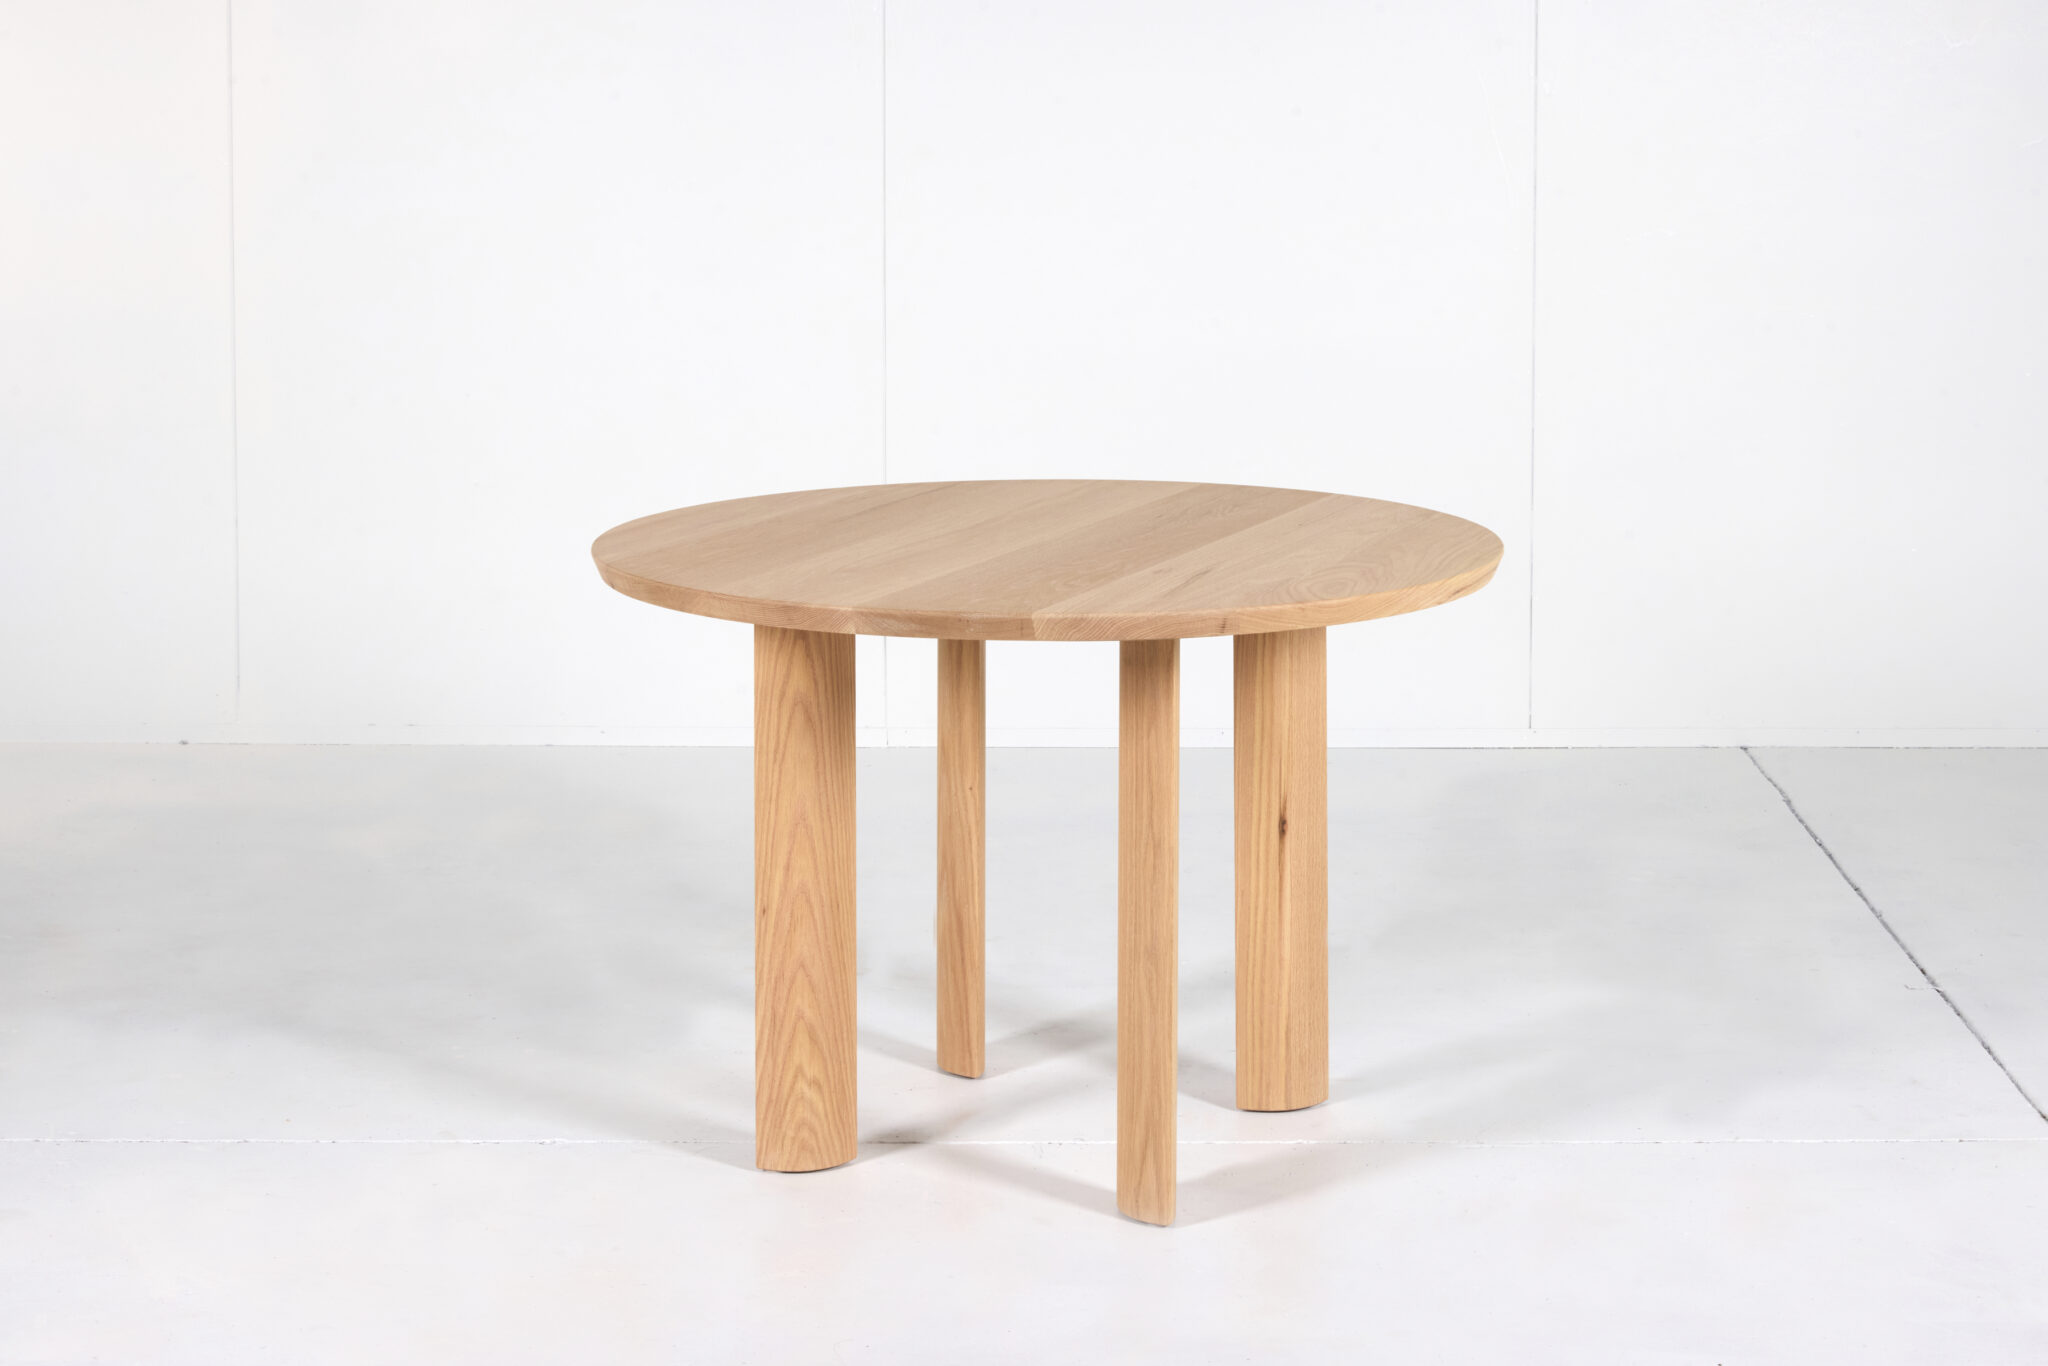 Elsternwick Round Dining Table made from premium timber with a smooth finish perfect for any dining space